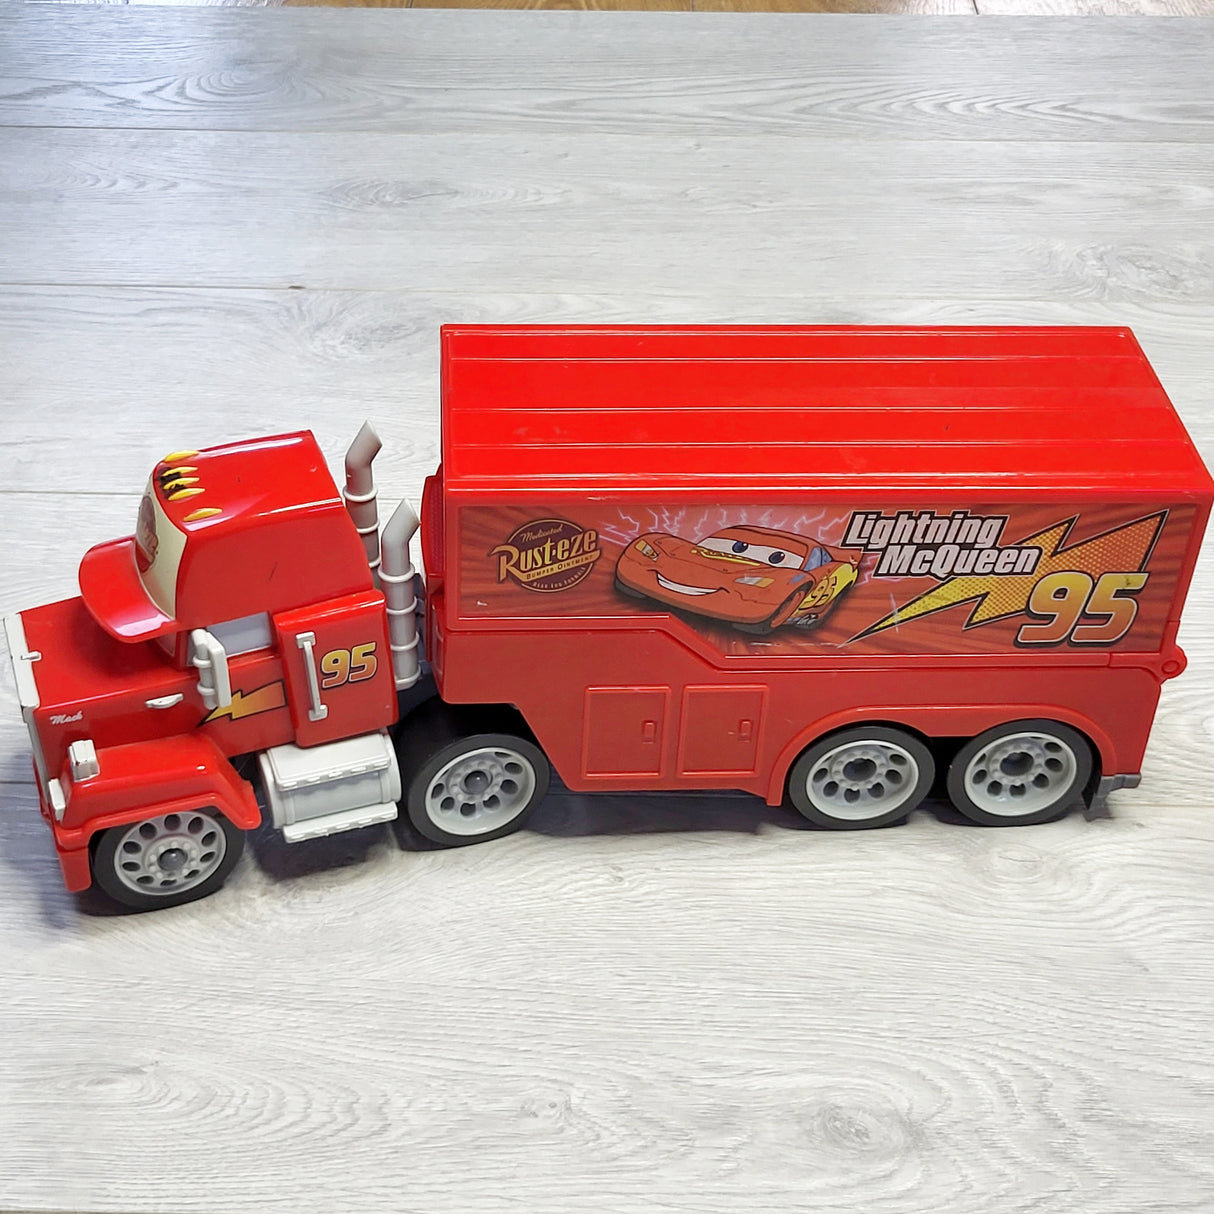 TCAD2 - Cars Lightning McQueen truck (opens to reveal ramp)